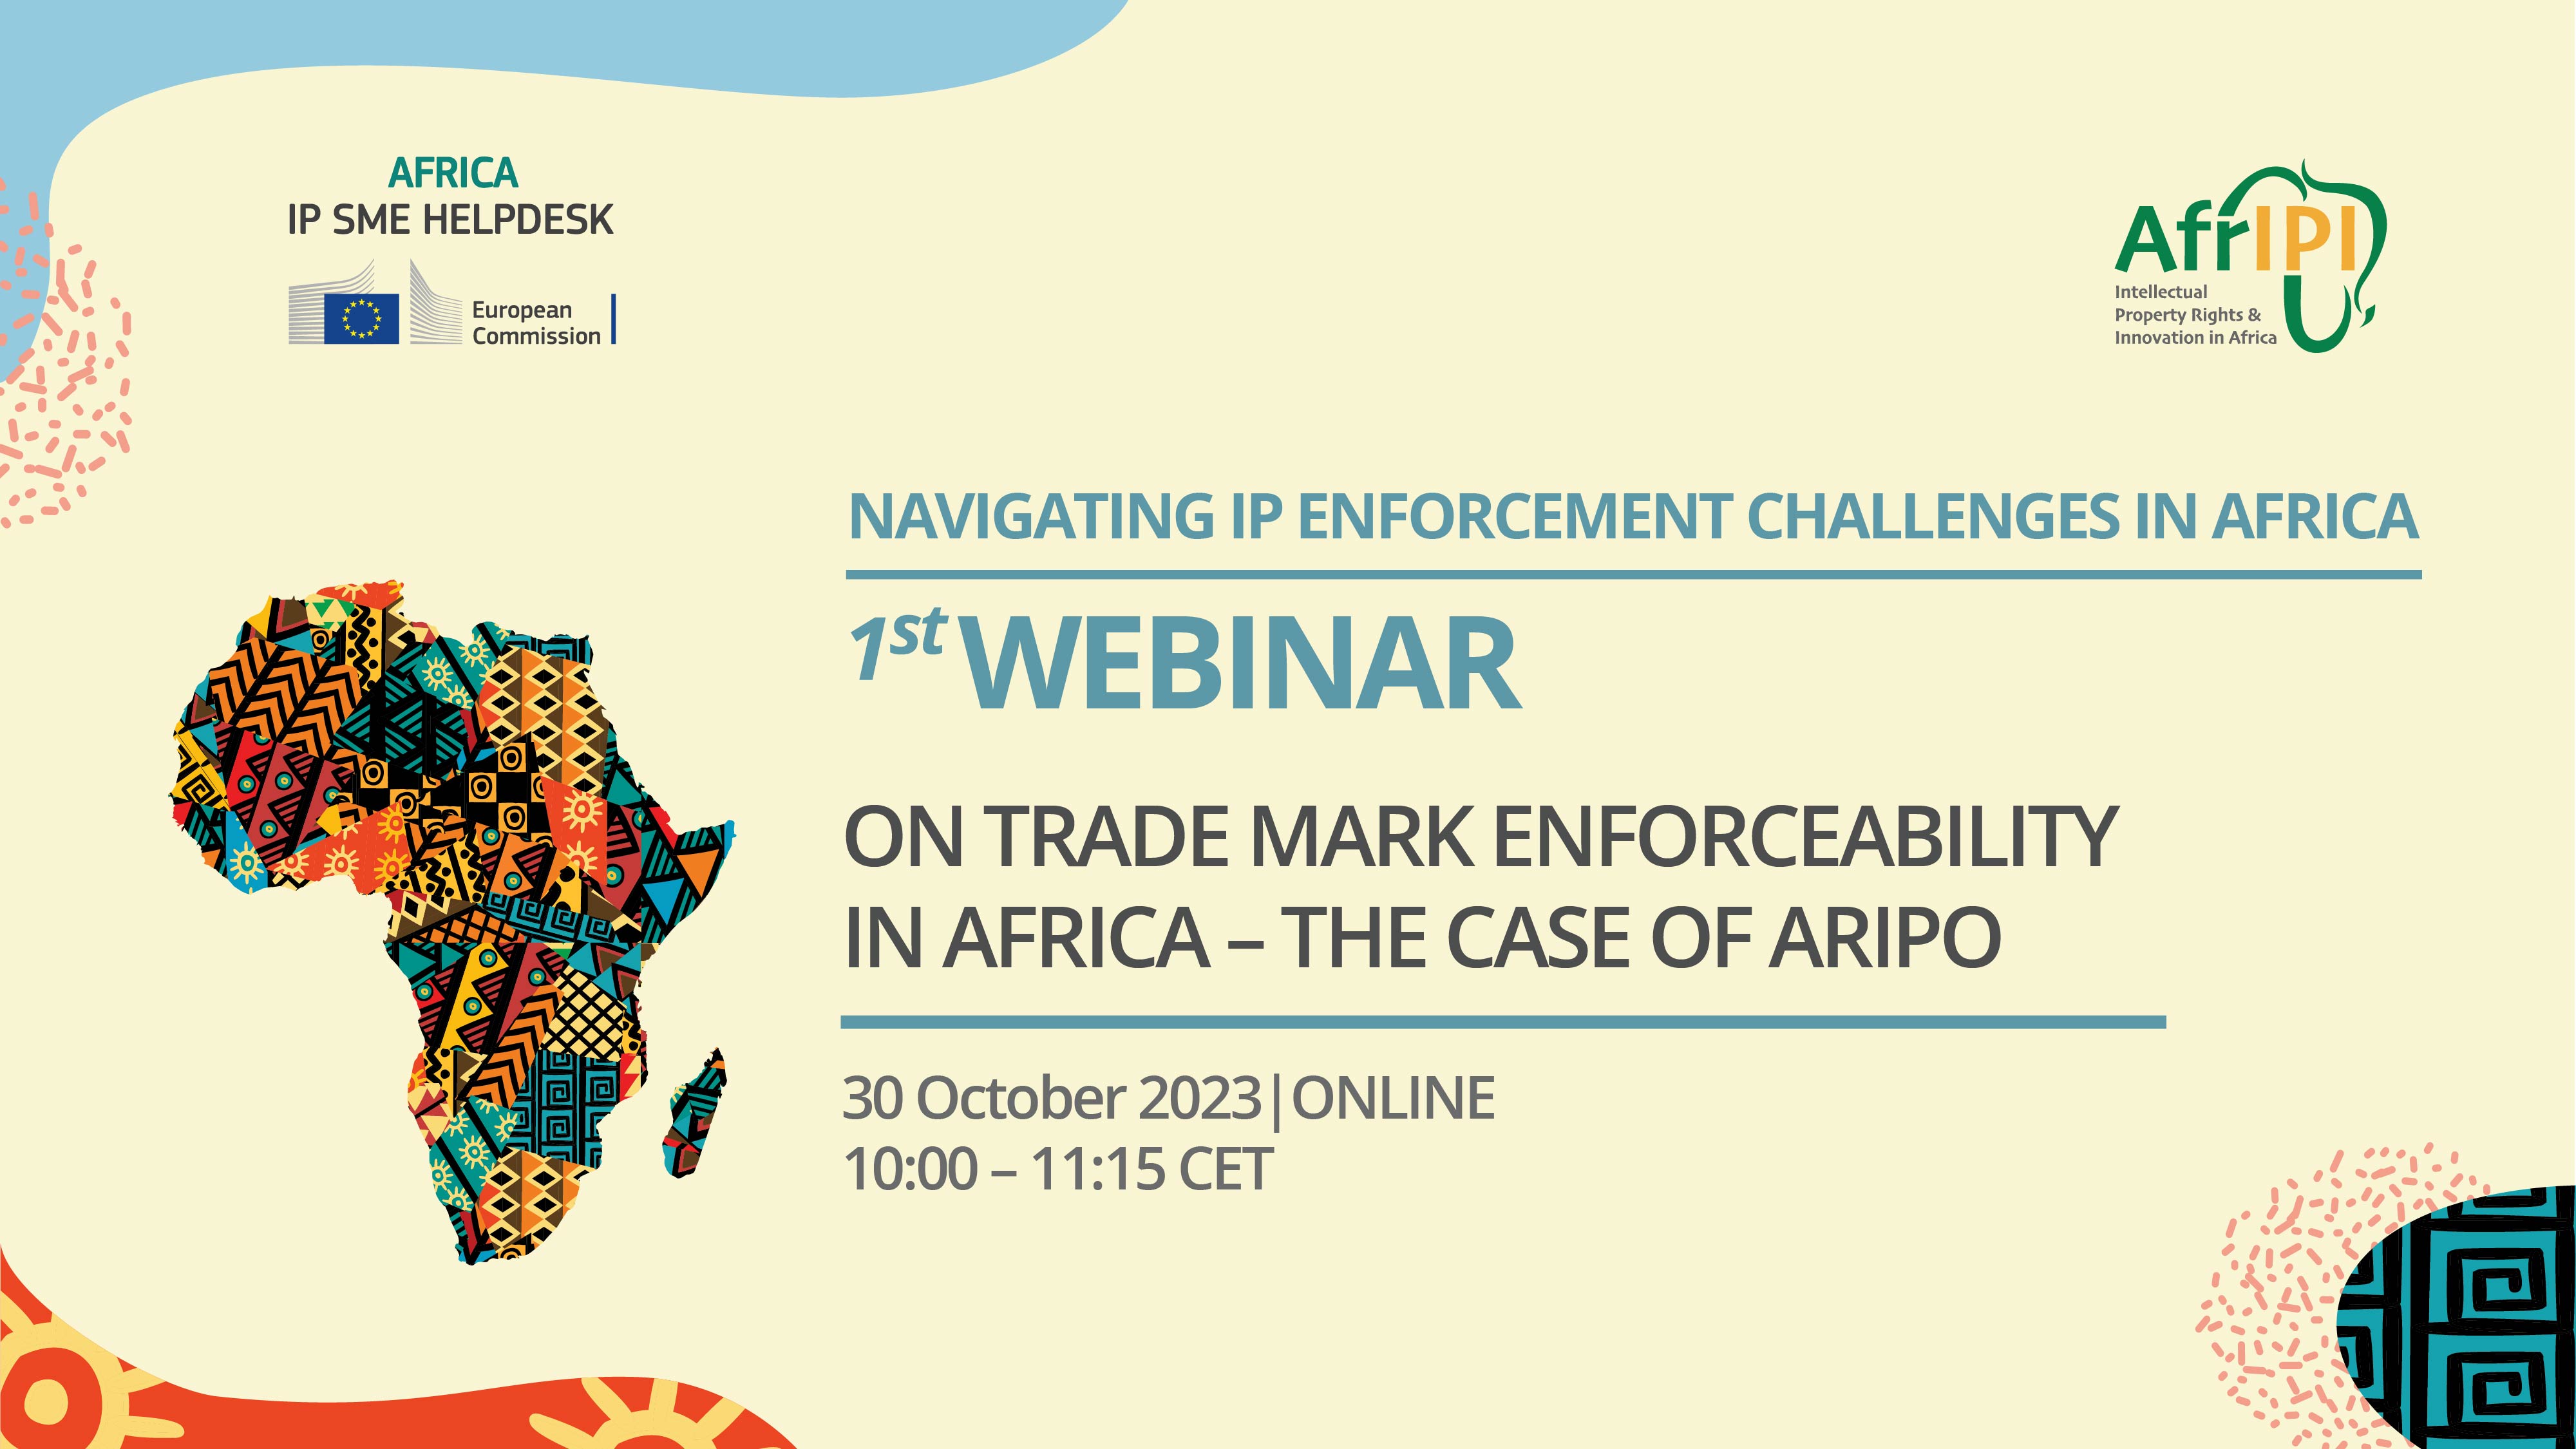 Trade mark enforceability in Africa – the case of ARIPO